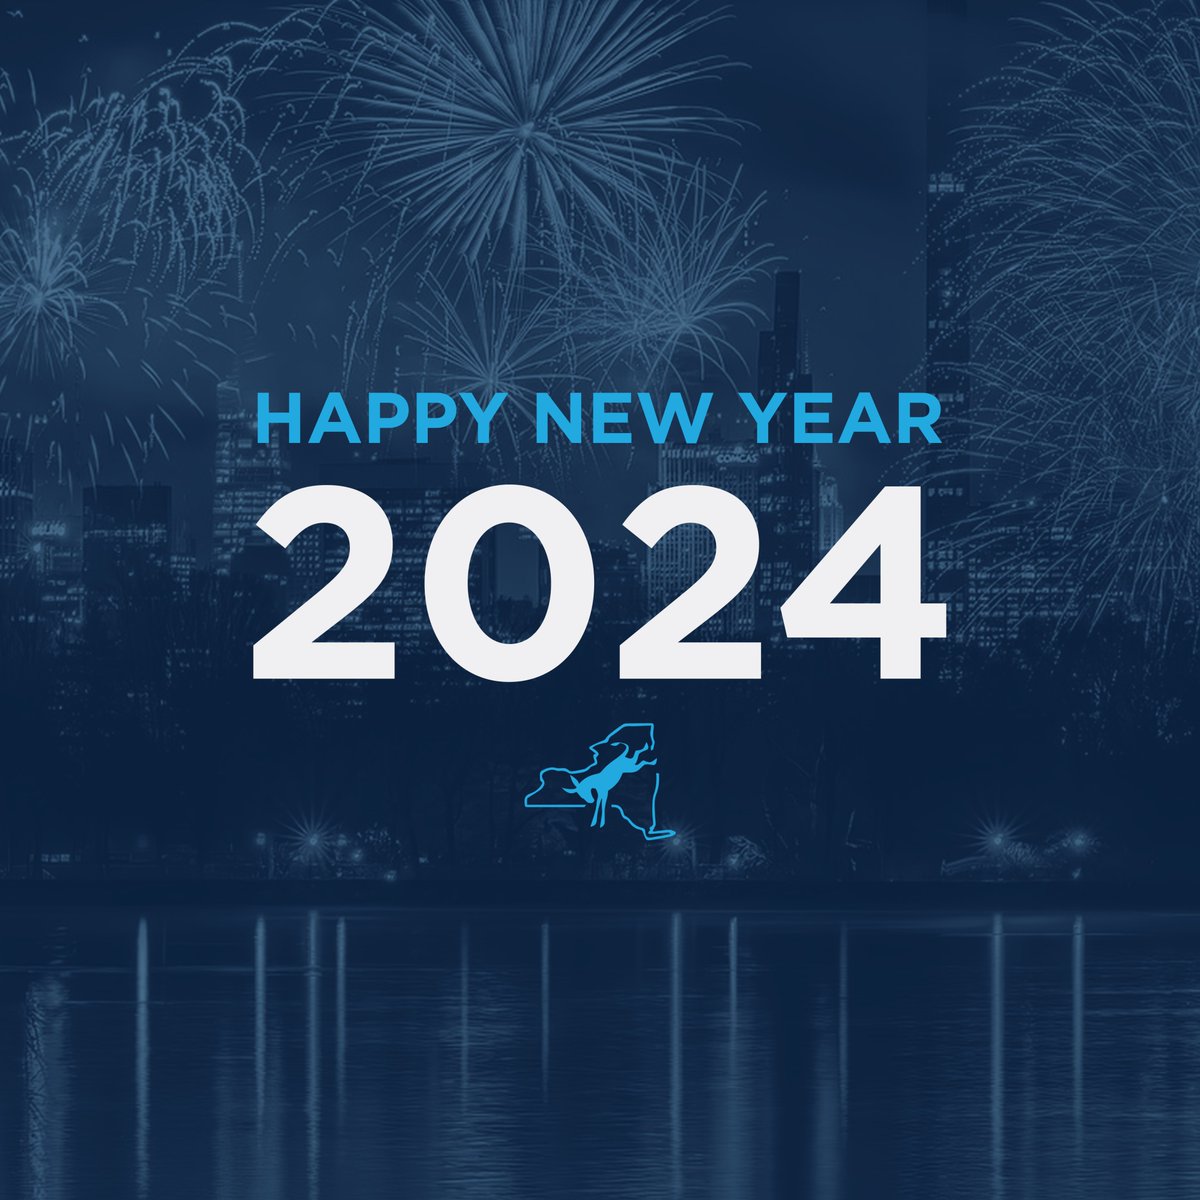 Happy New Year from the New York State Democratic Committee🥳